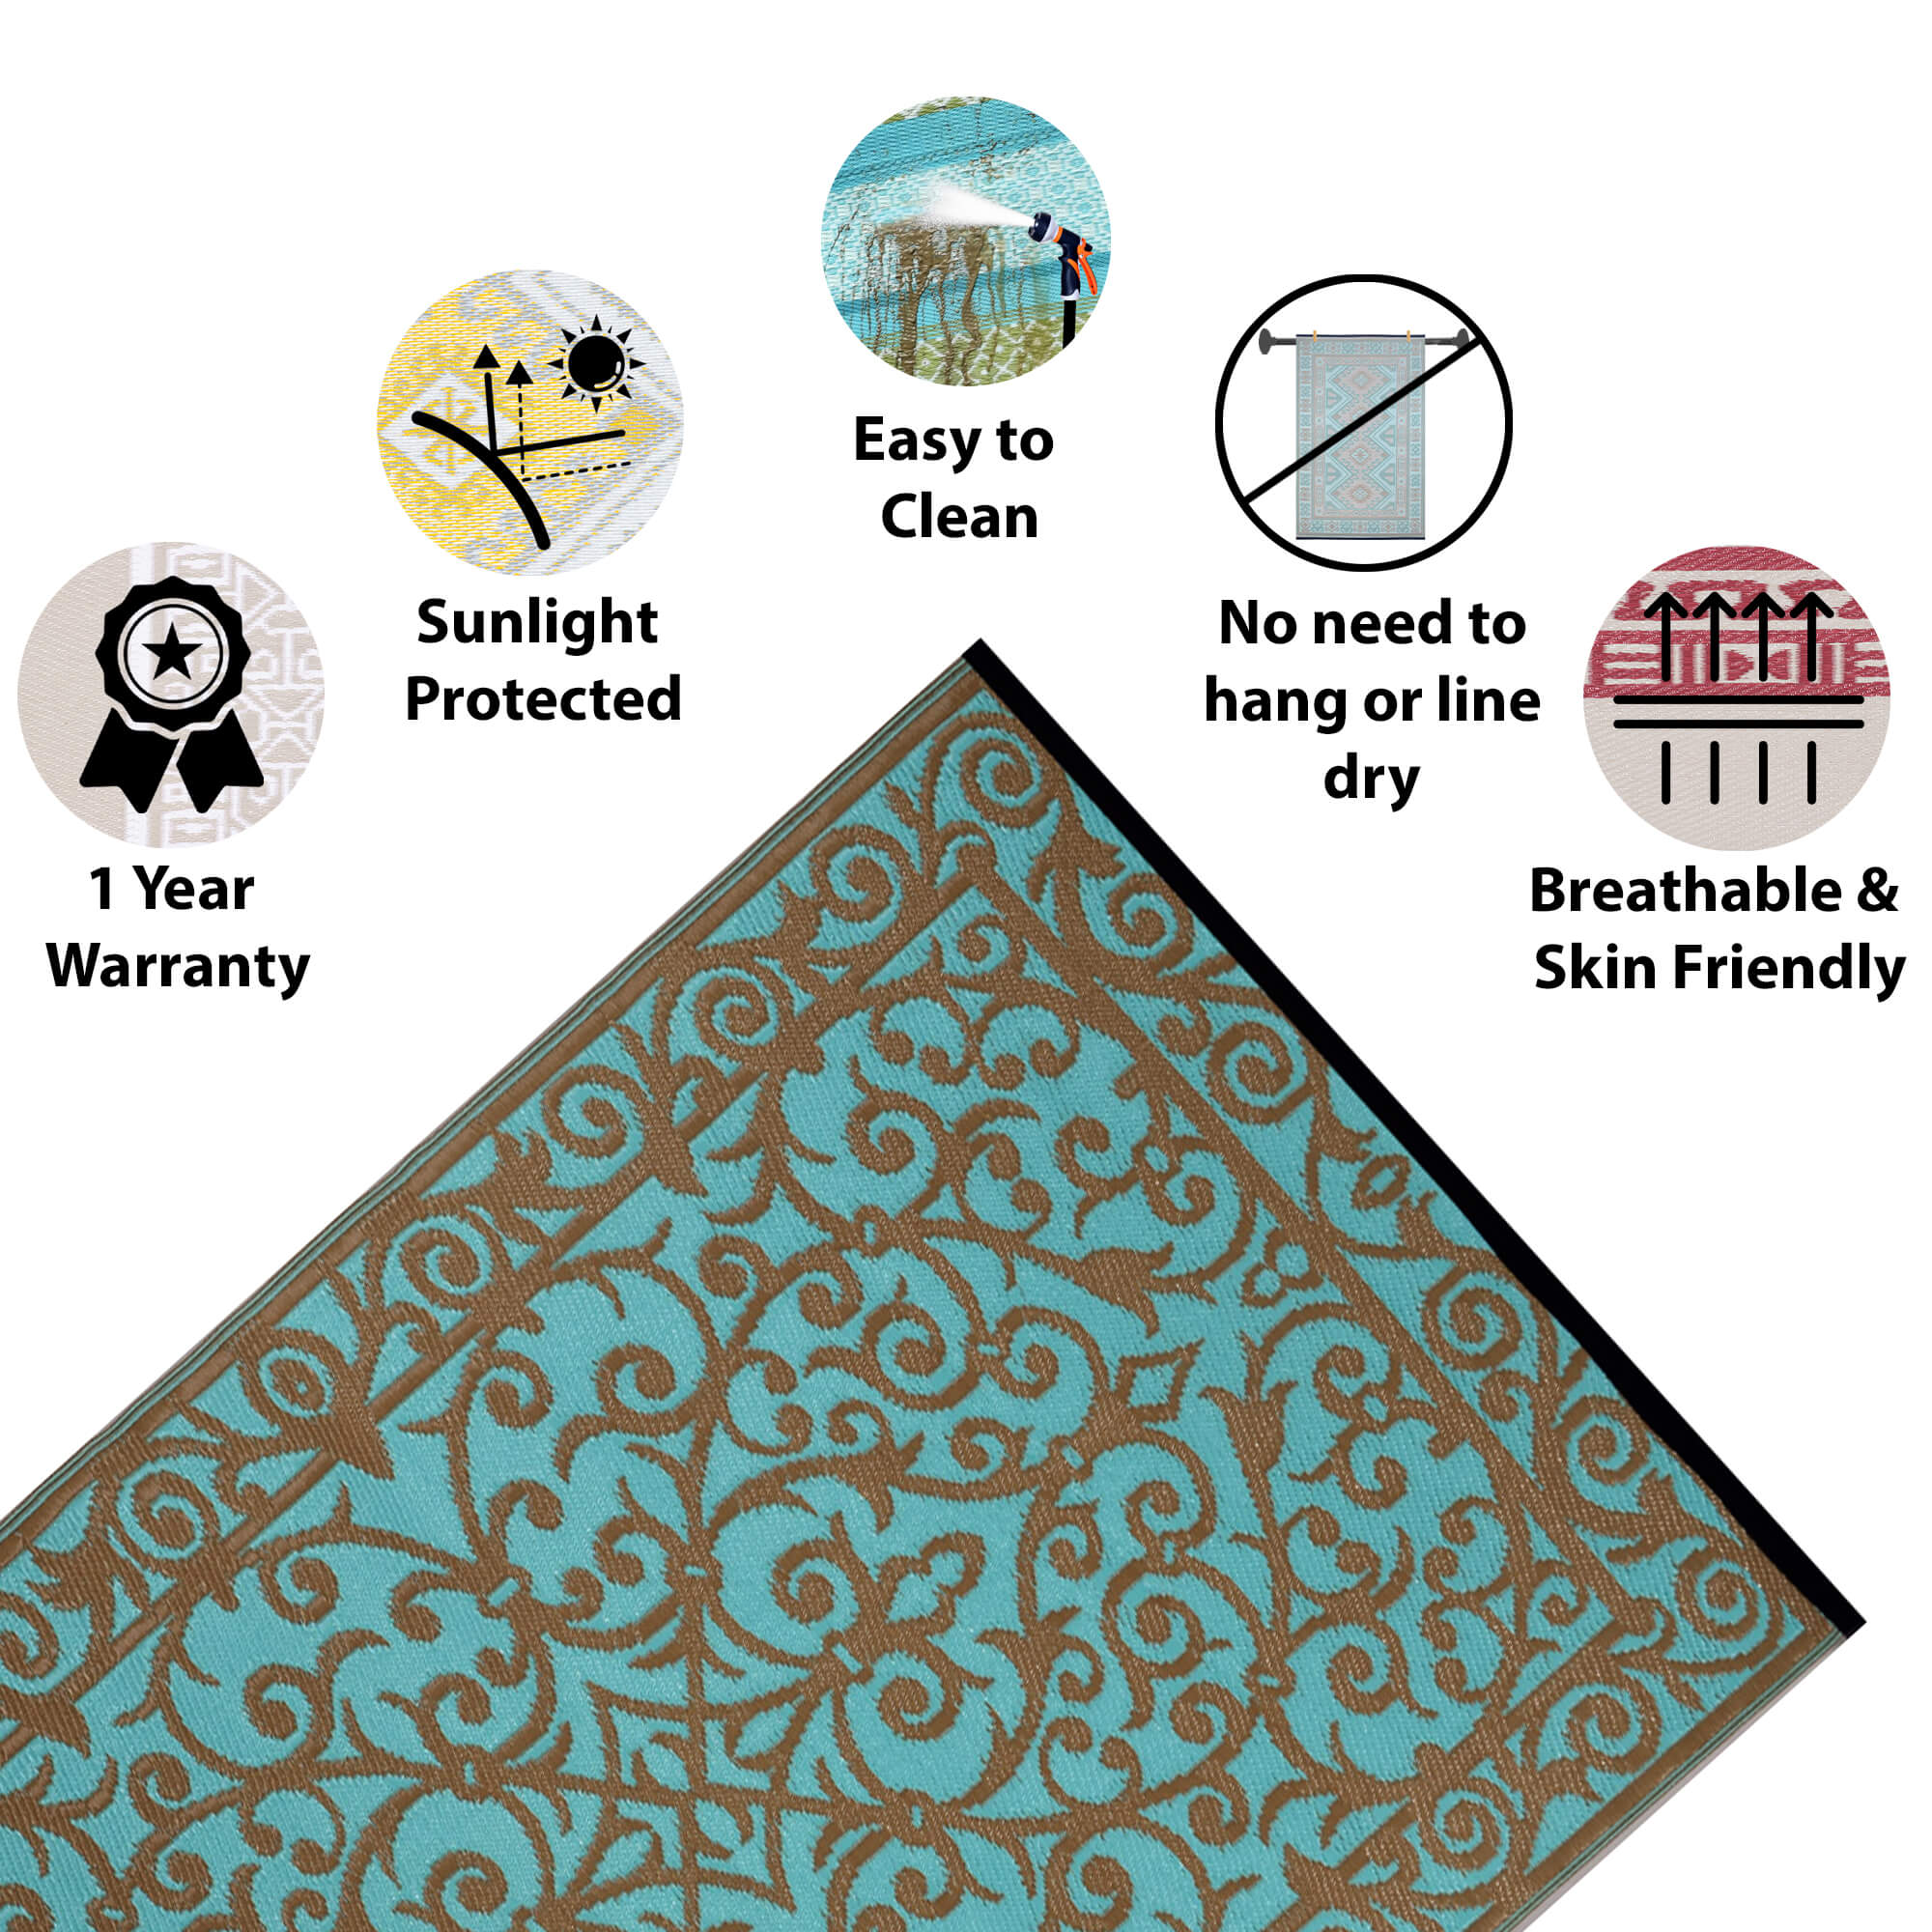 Gala Outdoor Recycled Plastic Rug (Blue Turquoise/Gold)